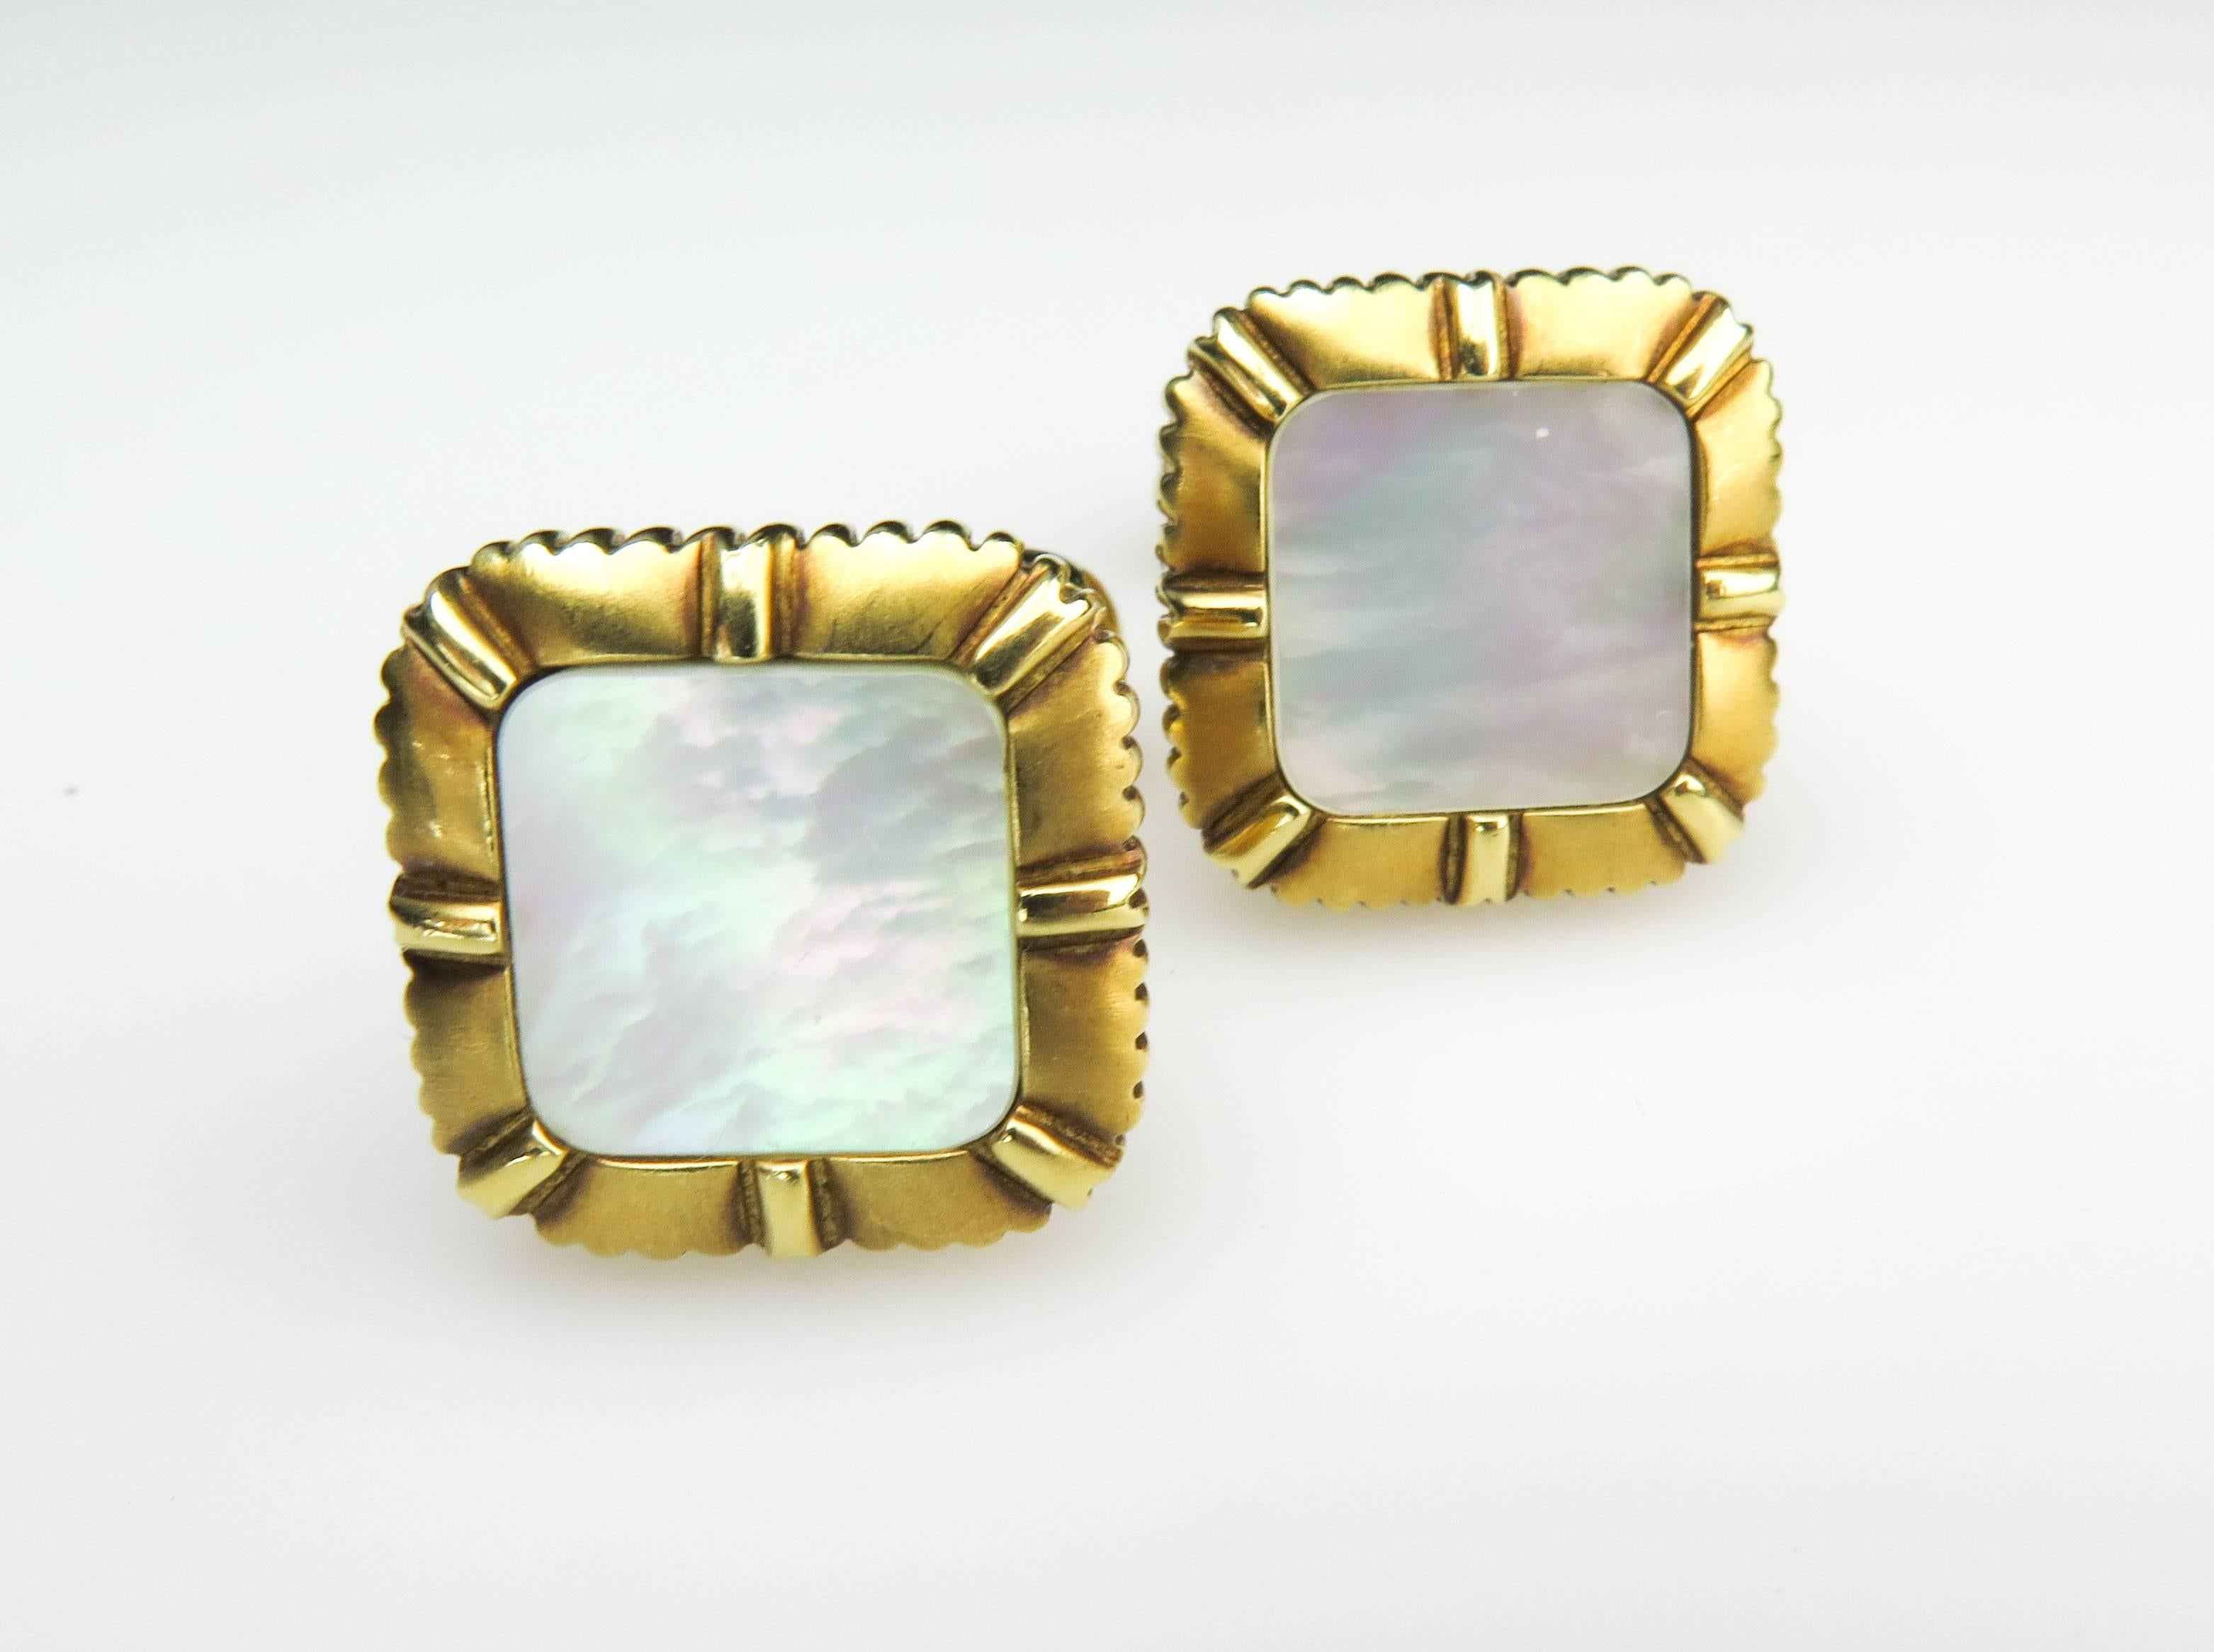 Very polished and handsome 18k yellow gold cufflinks. Inlaid luminous mother-of-pearl on both front and back sides. Made and signed by Asprey & Garrard.  The back swivels for easy closure. A bright beautiful cufflink.